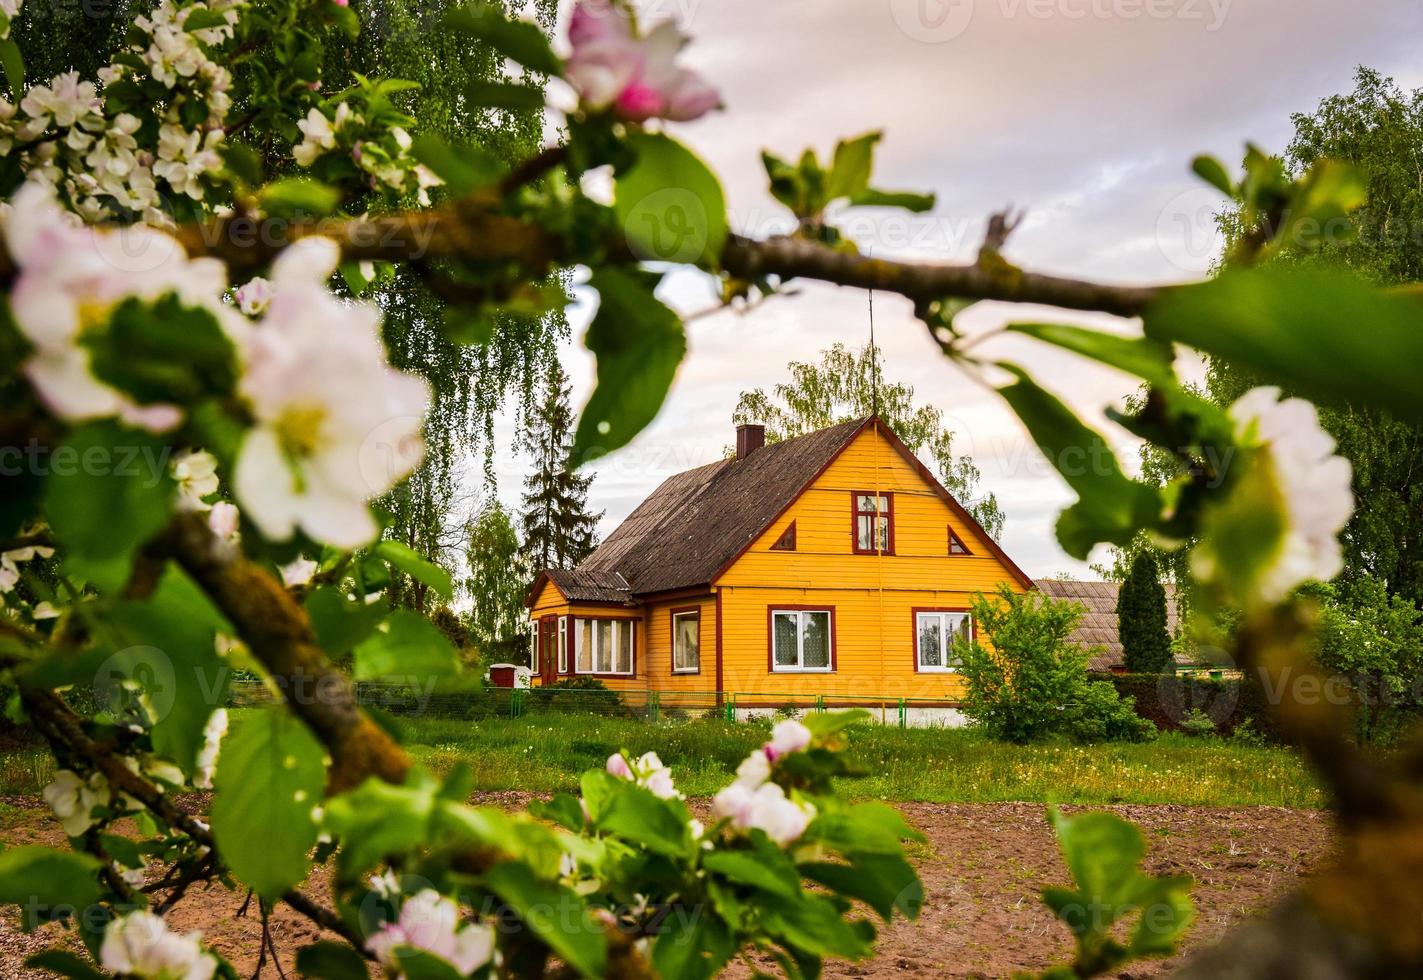 Beautiful traditional yellow house n Lithuania countryside with beautiful decorations photo